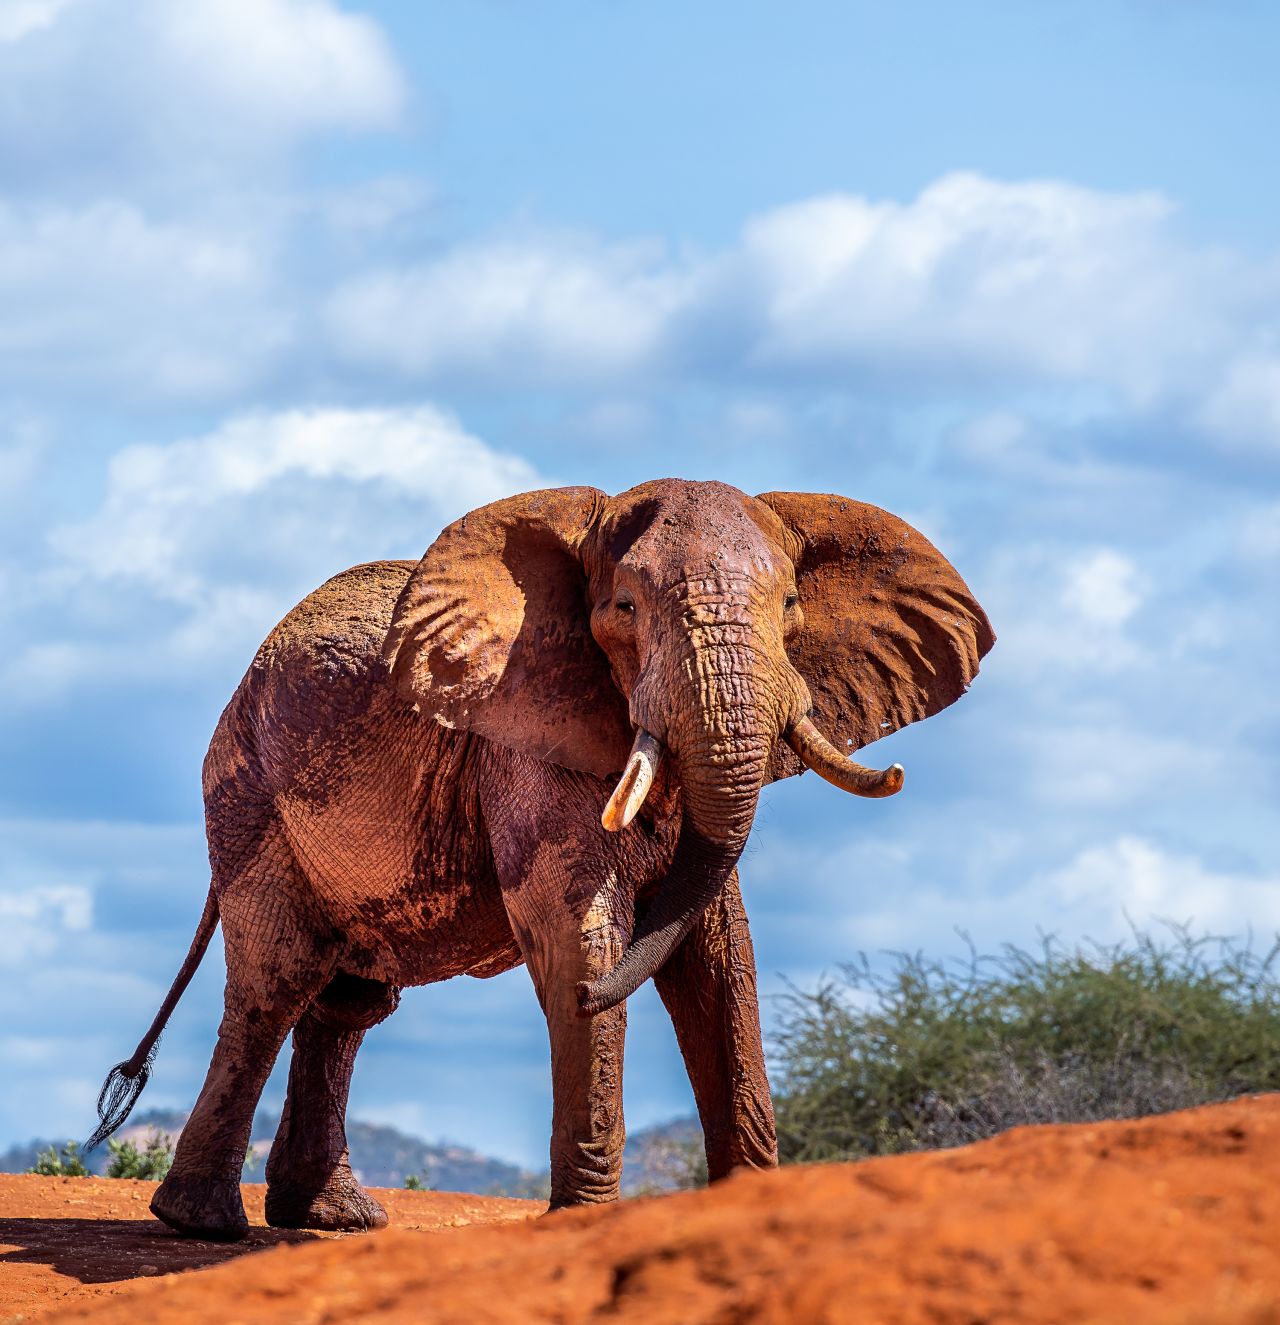 "By protecting the elephants, we're protecting other wildlife species and their habitats as well. The goal is to have all biodiversity protected -- not only elephants but all wildlife species within the Tsavo Conservation Area. Elephants and rhinos are the flagship species, but all other wildlife benefit from their protection," says Kyalo.